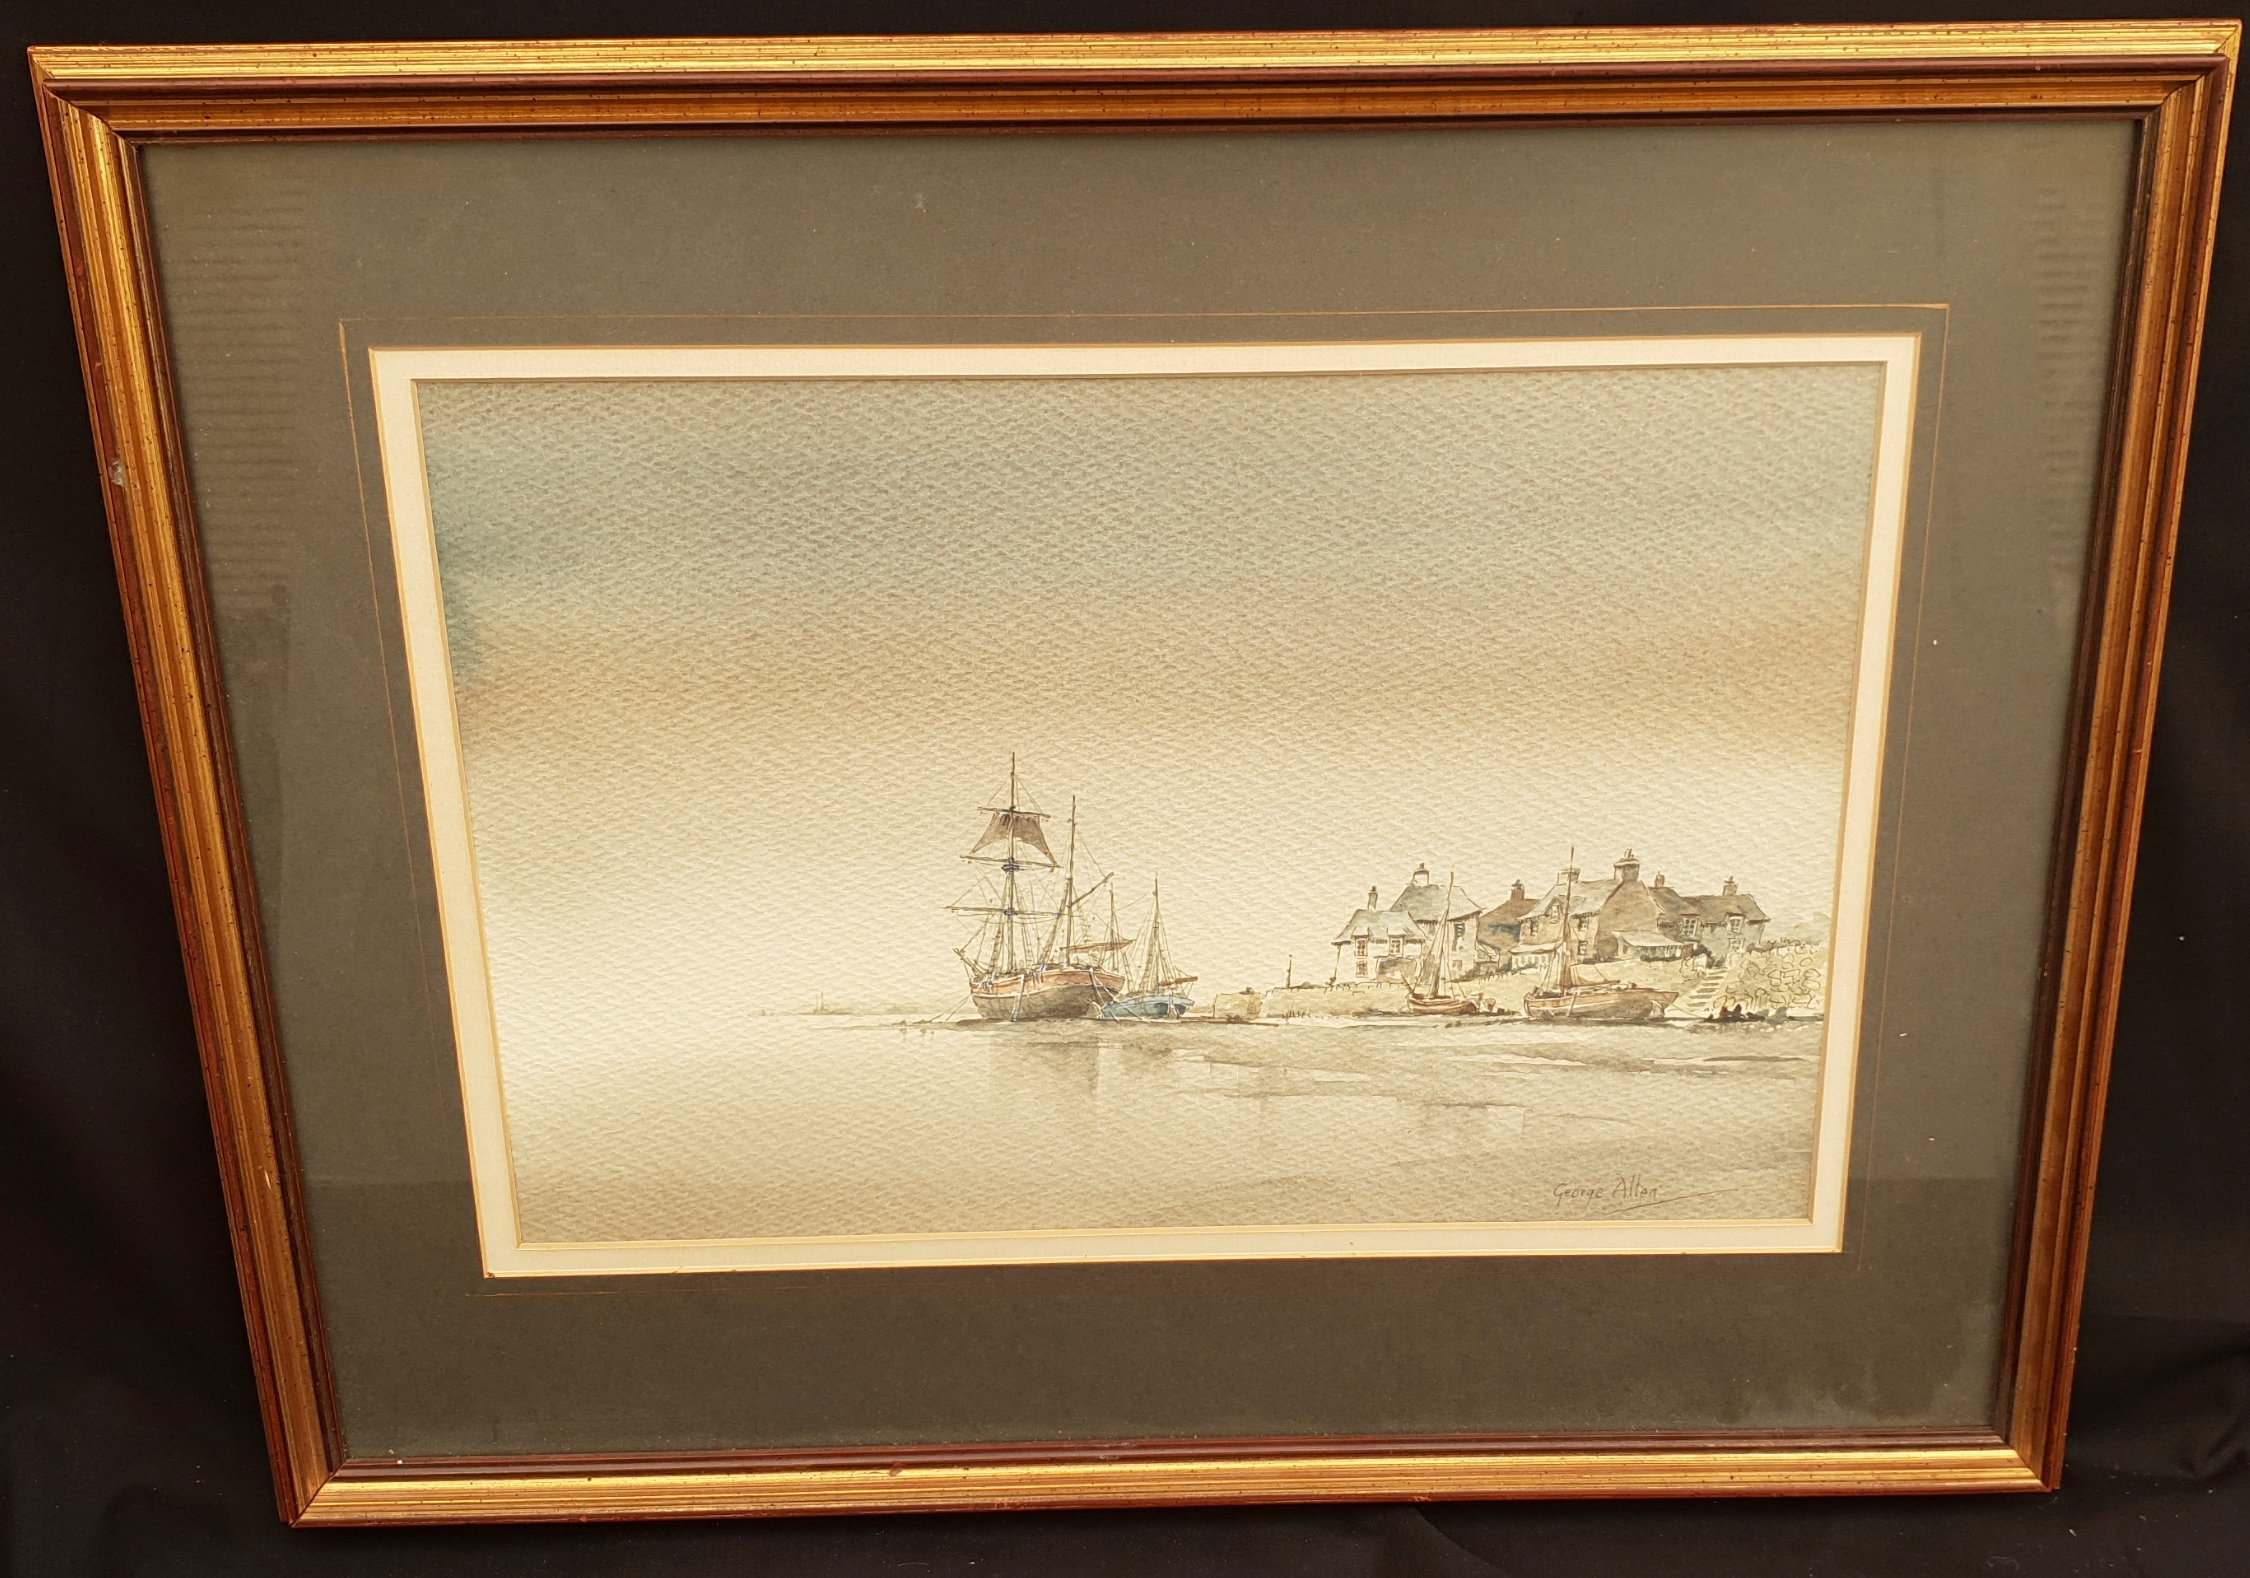 Vintage Art Framed Painting Watercolour Nautical Theme Signed Lower Right George Allen